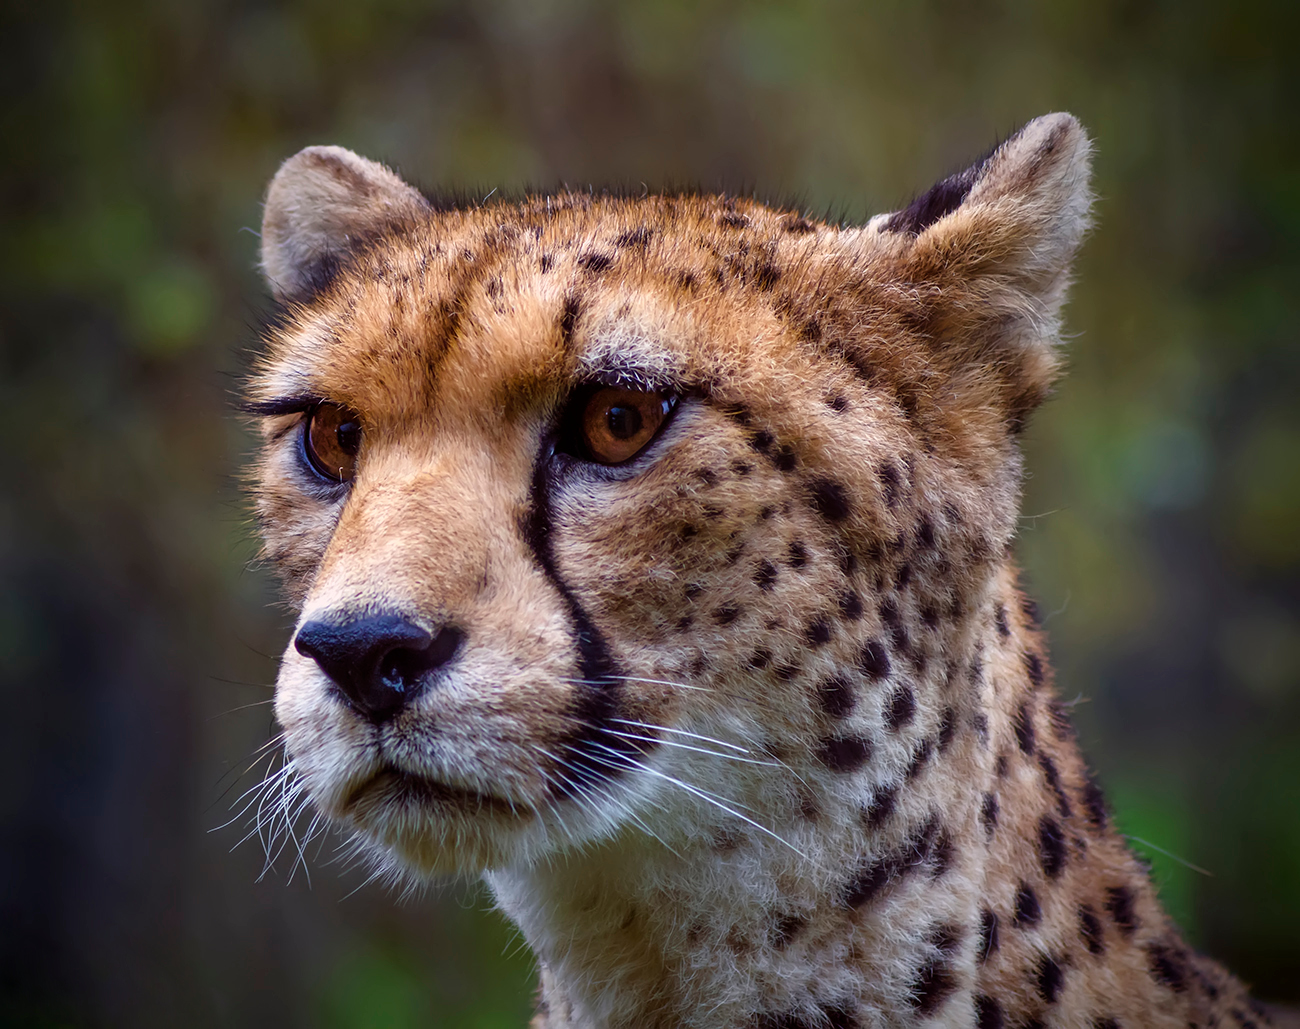 The Northwest African Cheetah (Acinonyx jubatus hecki), also known as the Saharan Cheetah, is a subspecies of cheetah found in the northwestern part of Africa (particularly the central western Sahara desert and the Sahel). It is classified as critically endangered, with a total world population estimated to be about 250 mature individuals. Image credit: Steve Wilson, Creative Commons